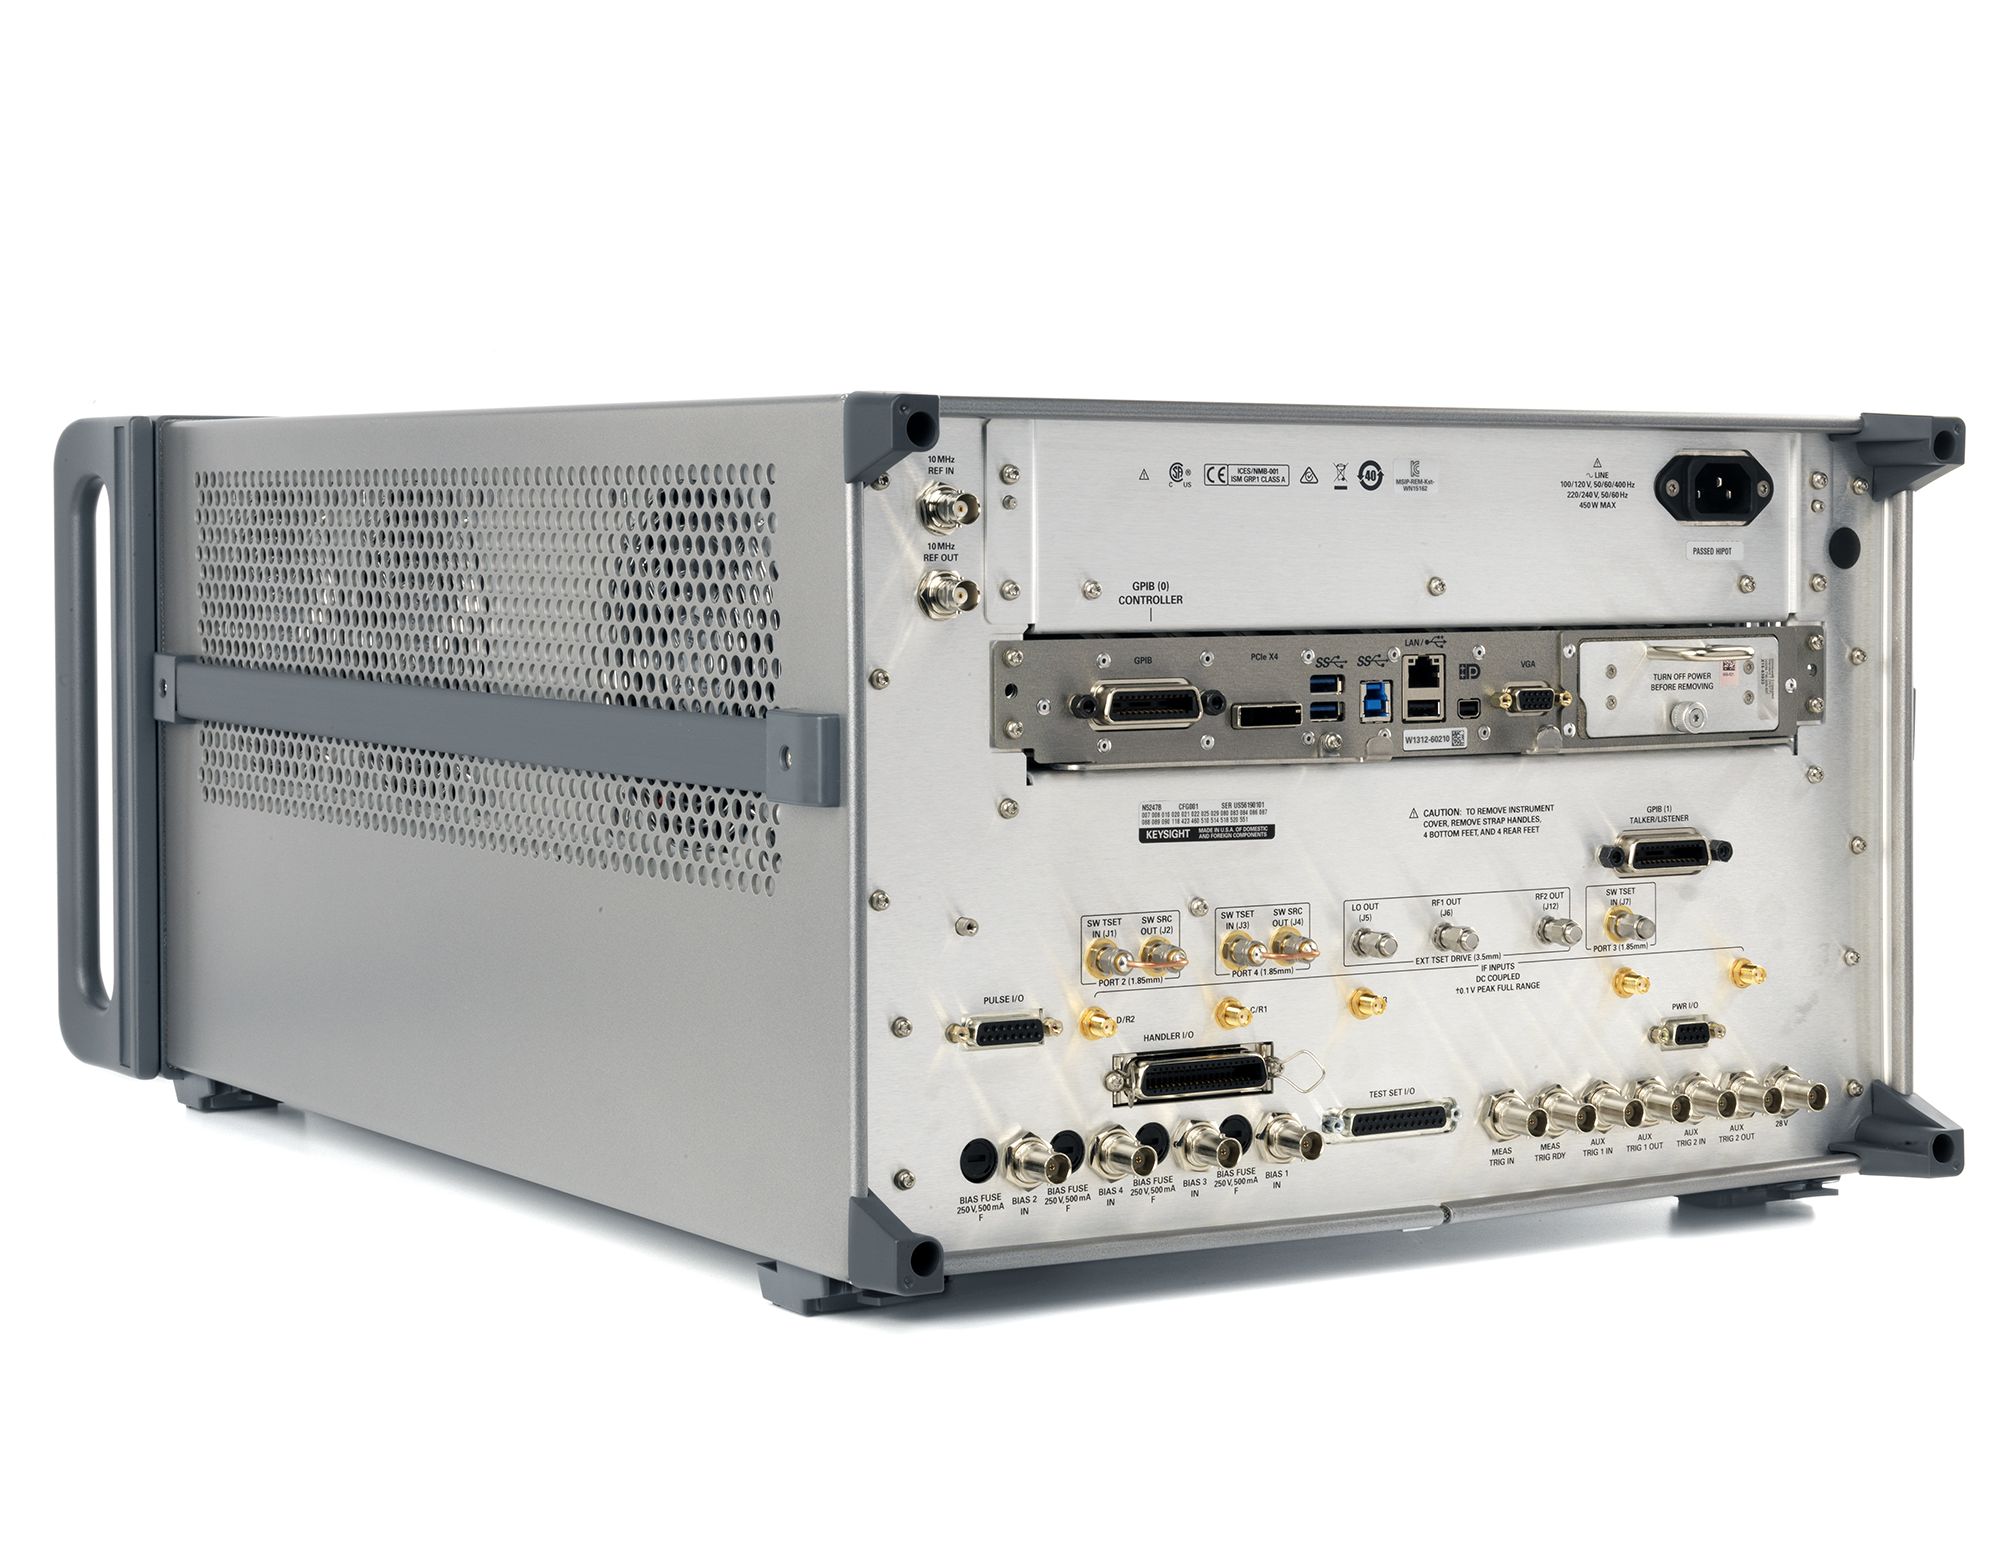 Keysight N5225B-419 10 MHz to 50 GHz / 4-ports / Configurable Test Set / Source and Receiver Attenuators / Bias Tees / Second Source